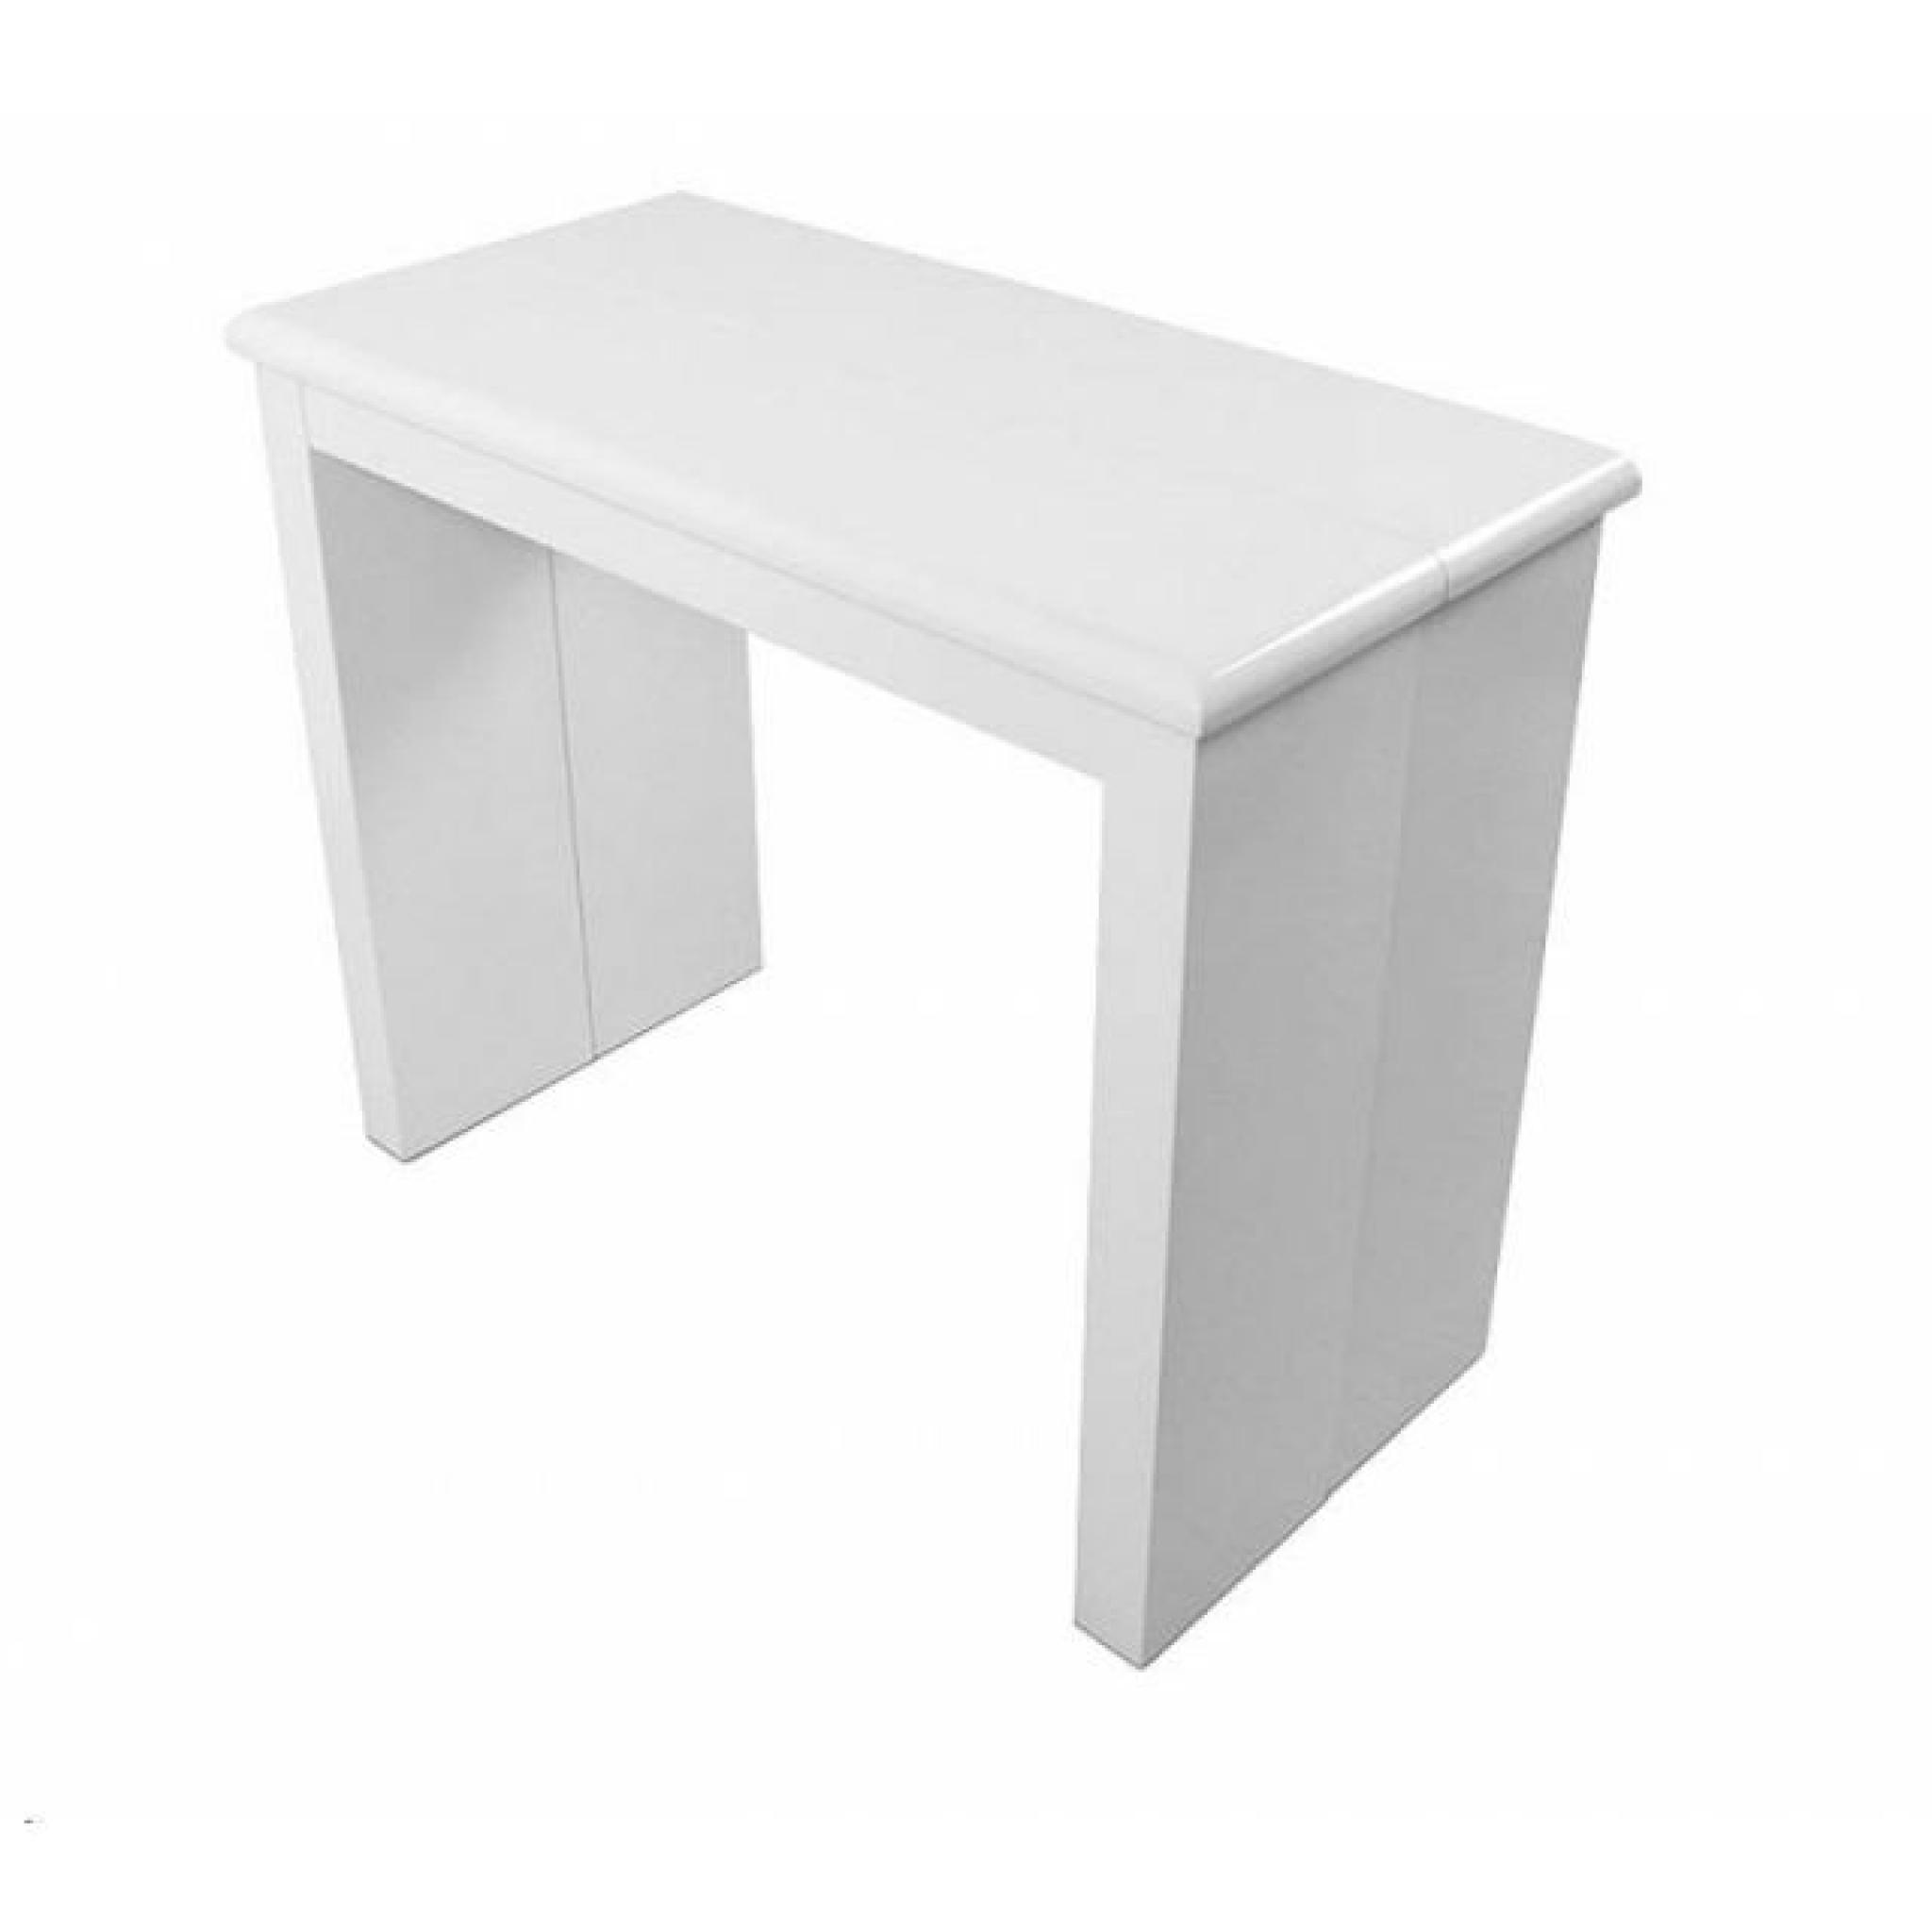 TABLE CONSOLE EXTENSIBLE KELLY BLANC LAQUEE